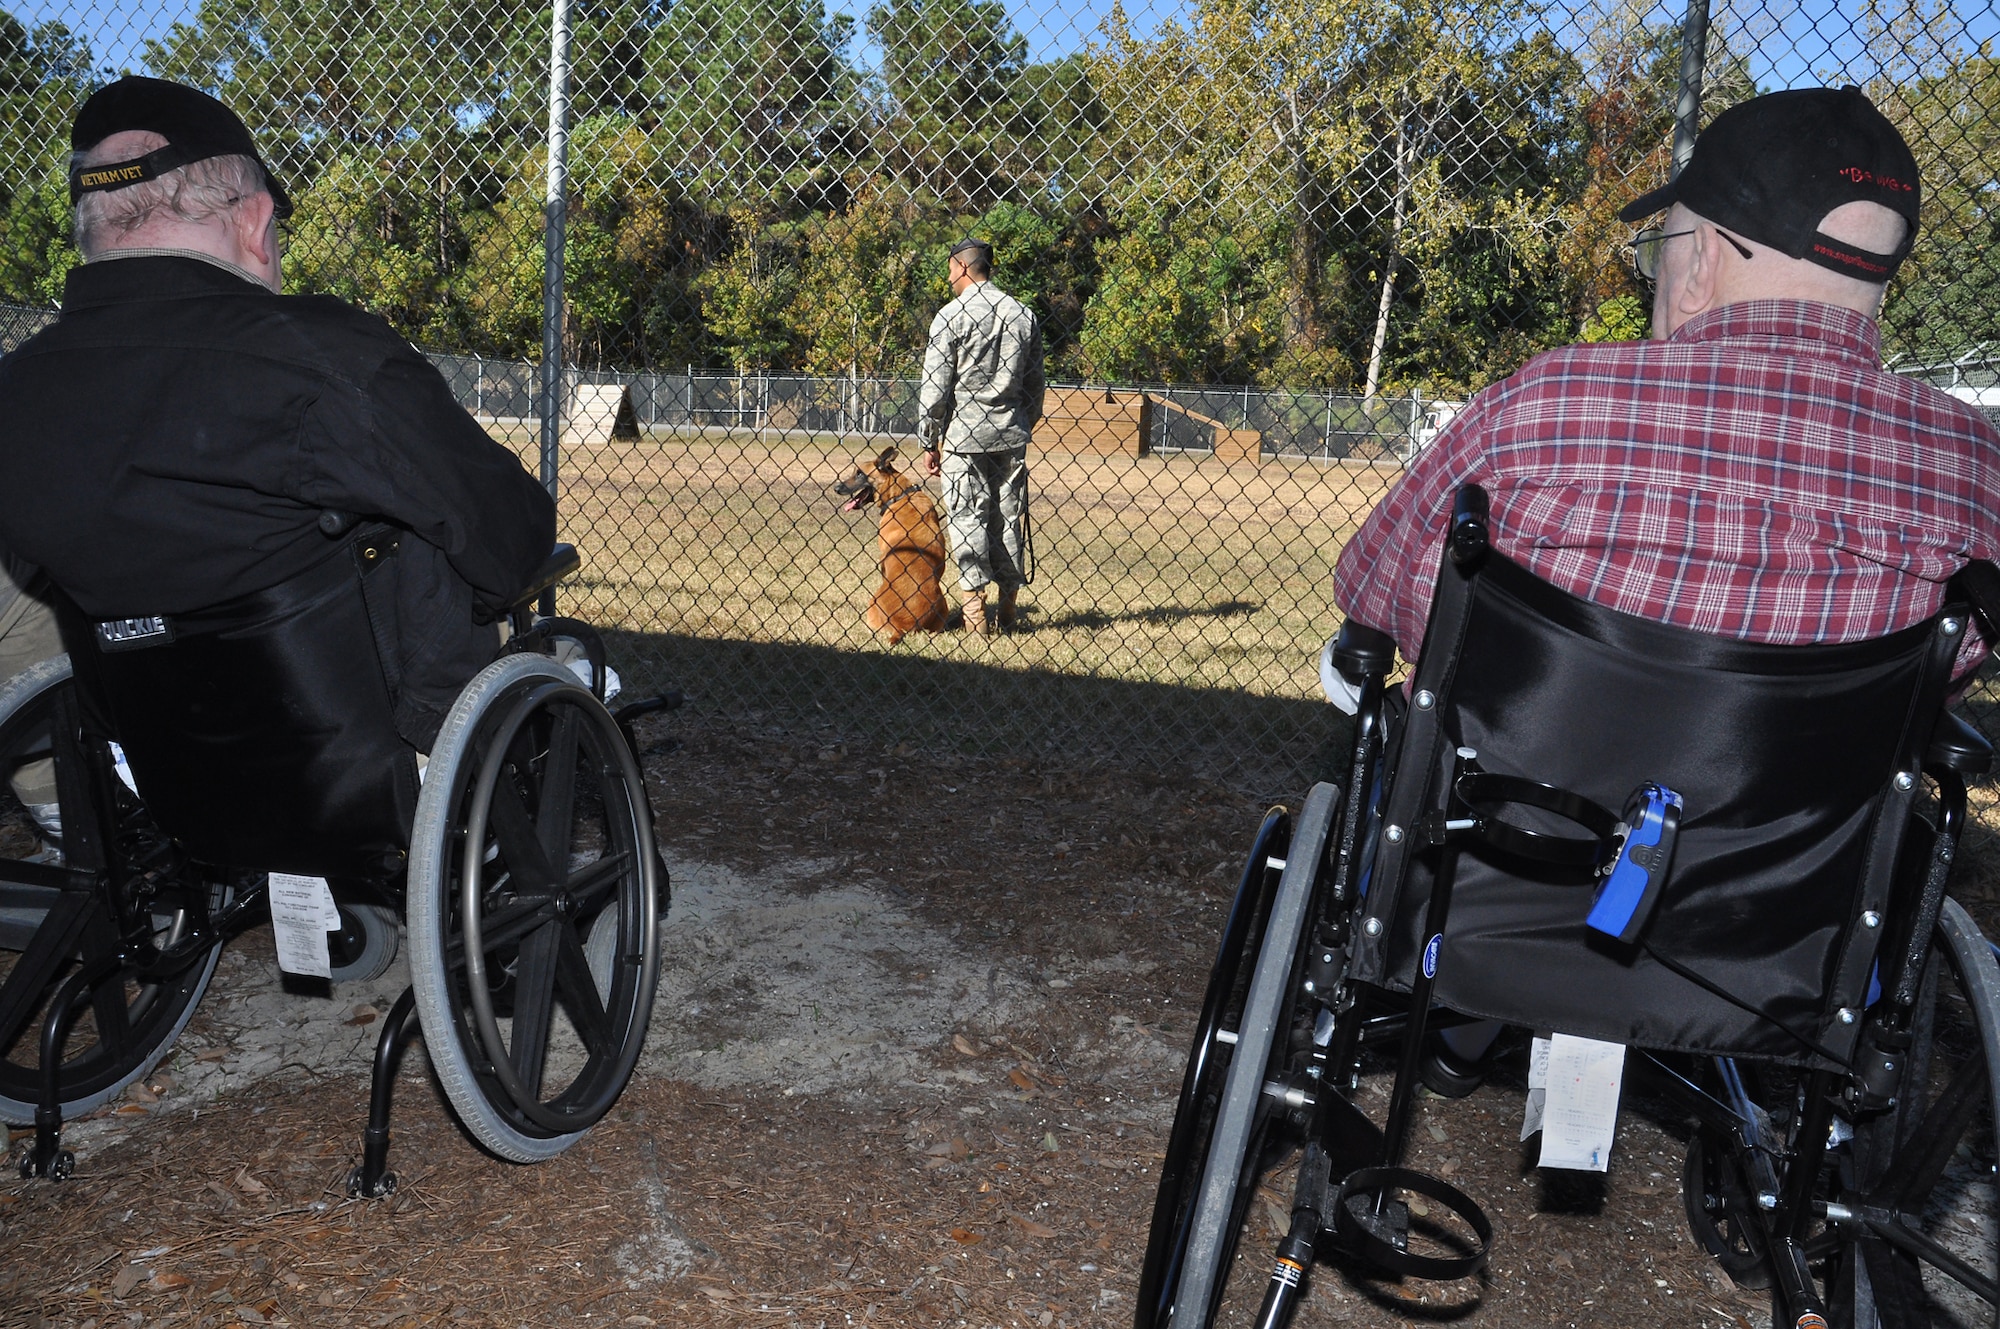 Veterans and community living center residents Leonard Whitaker and Richard Cammer from Ralph H. Johnson VA Medical Center eagerly await a demonstration by a military working dog and his handler Staff Sgt. Fazel Munshi.  The Veterans toured the Joint Base Charleston Nov. 15 as part of the 315th Airlift Wing’s community relations program. (U.S. Air Force Photo/Michael Dukes)